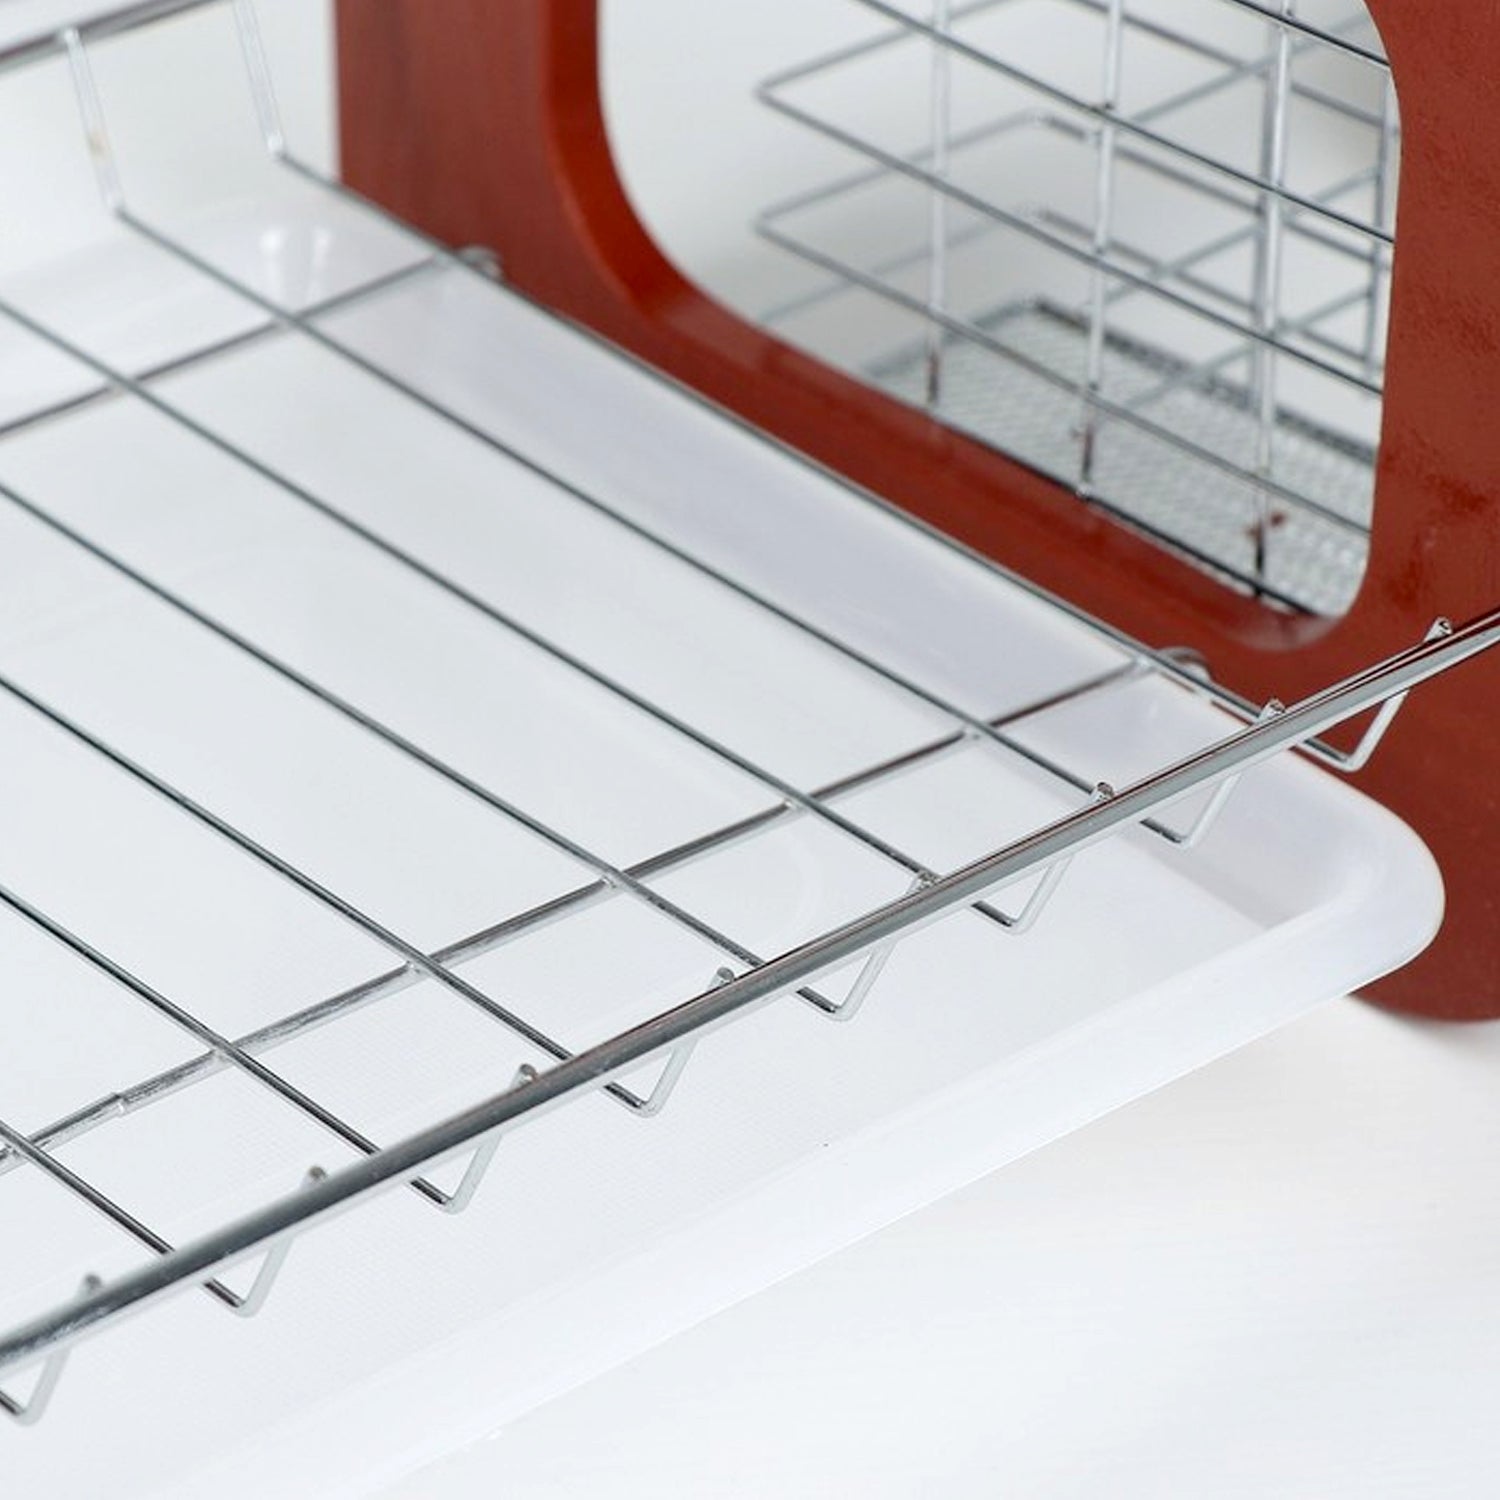 7666 Dish Drying Rack 2 Tier Attractive Design Rack For Kitchen Use DeoDap